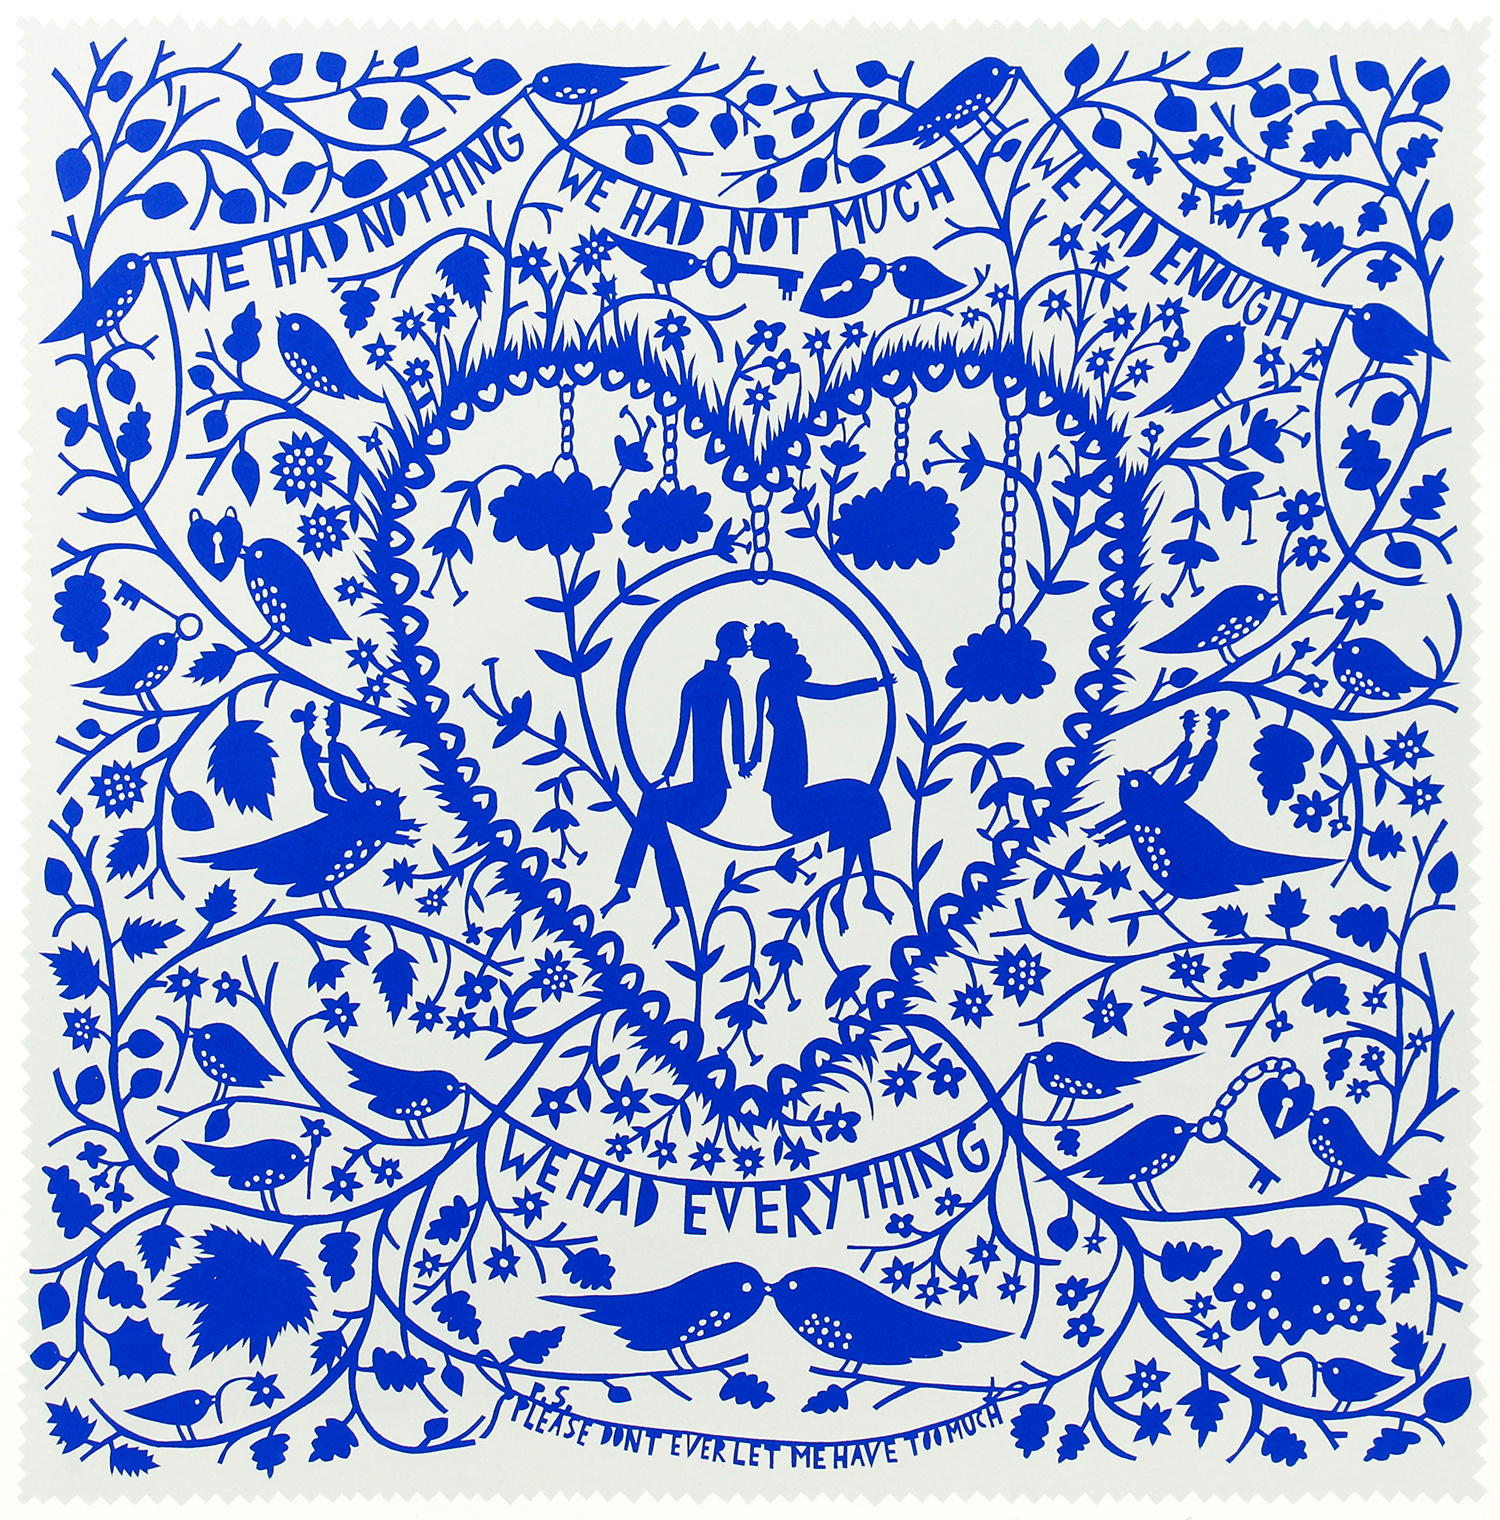 We Had Everything by Rob Ryan